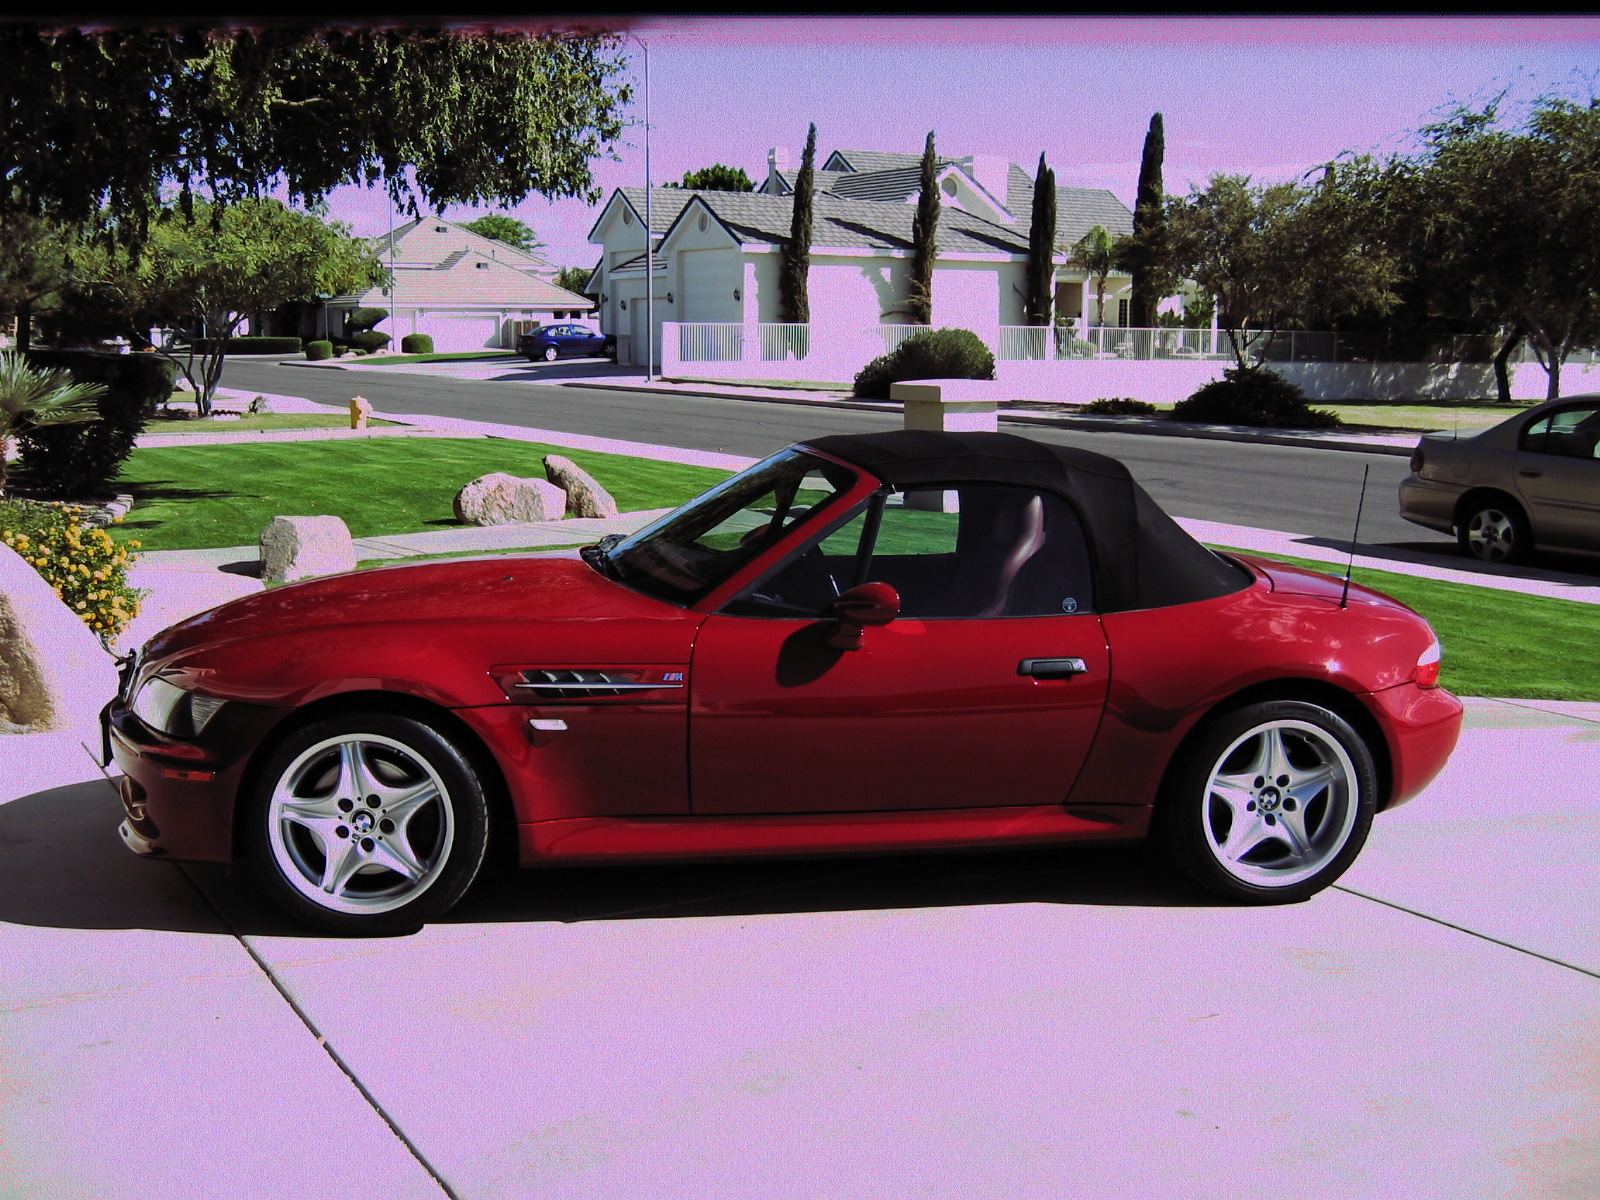 1999 BMW M Roadster Z3 Imola Red 2DR Convertible - SOLD FOR $13,950.00